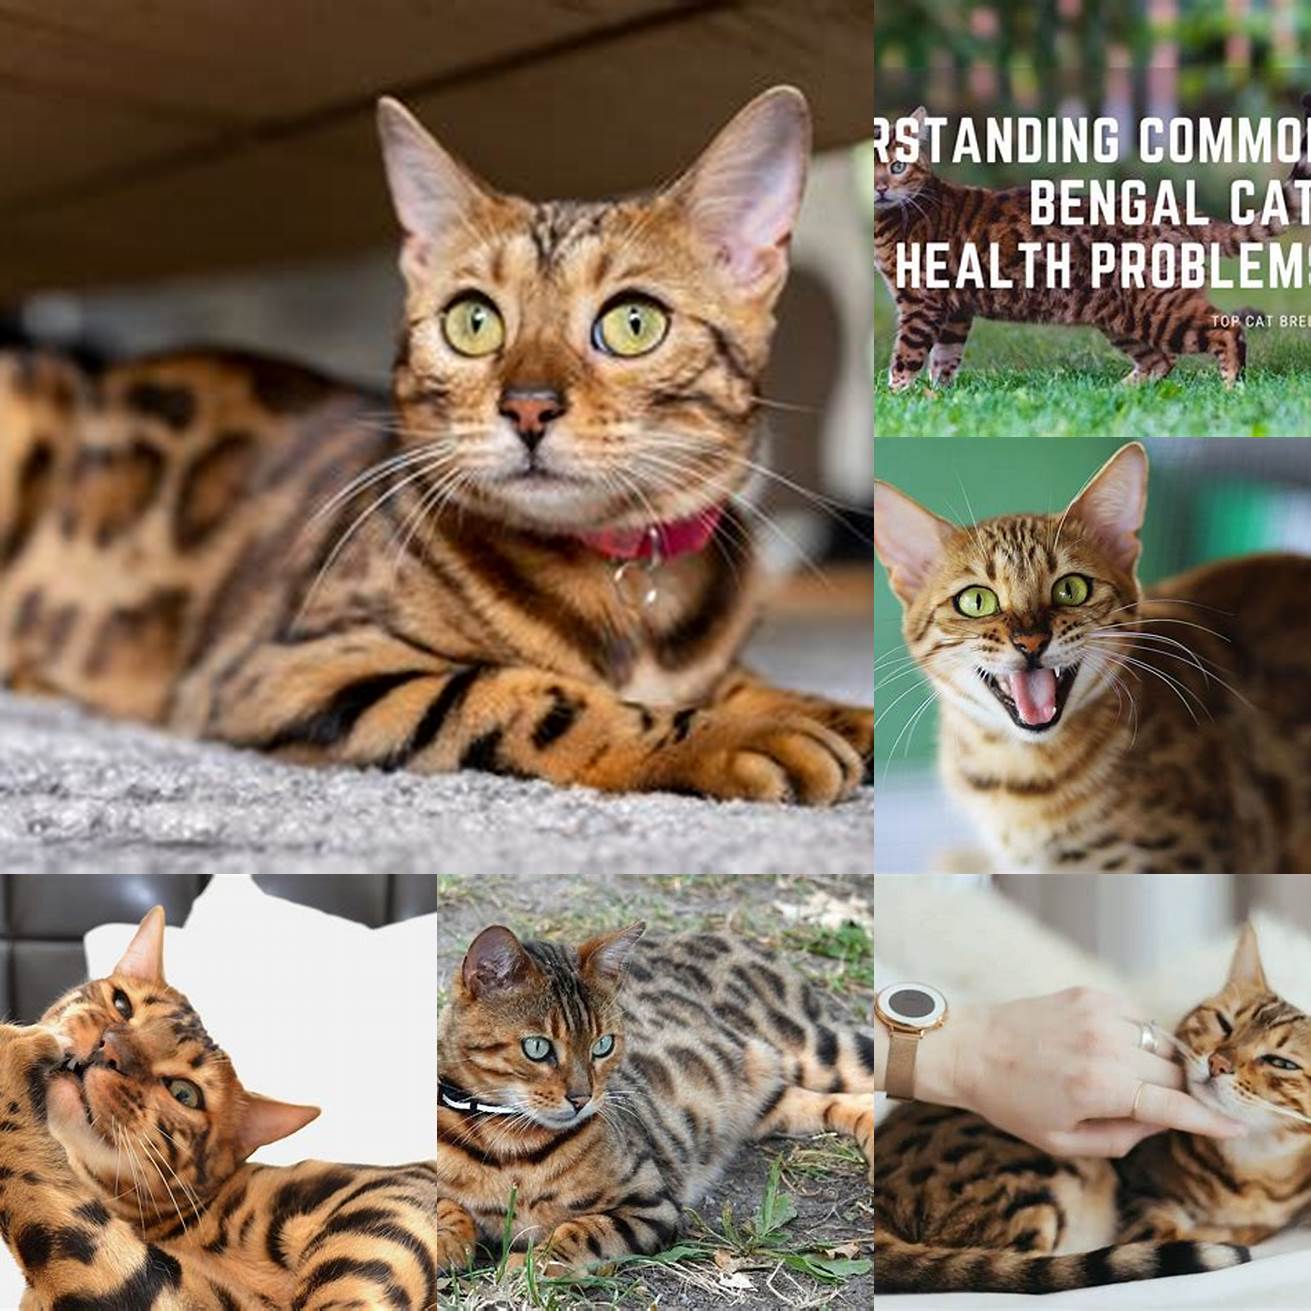 Bengal cats are prone to health issues